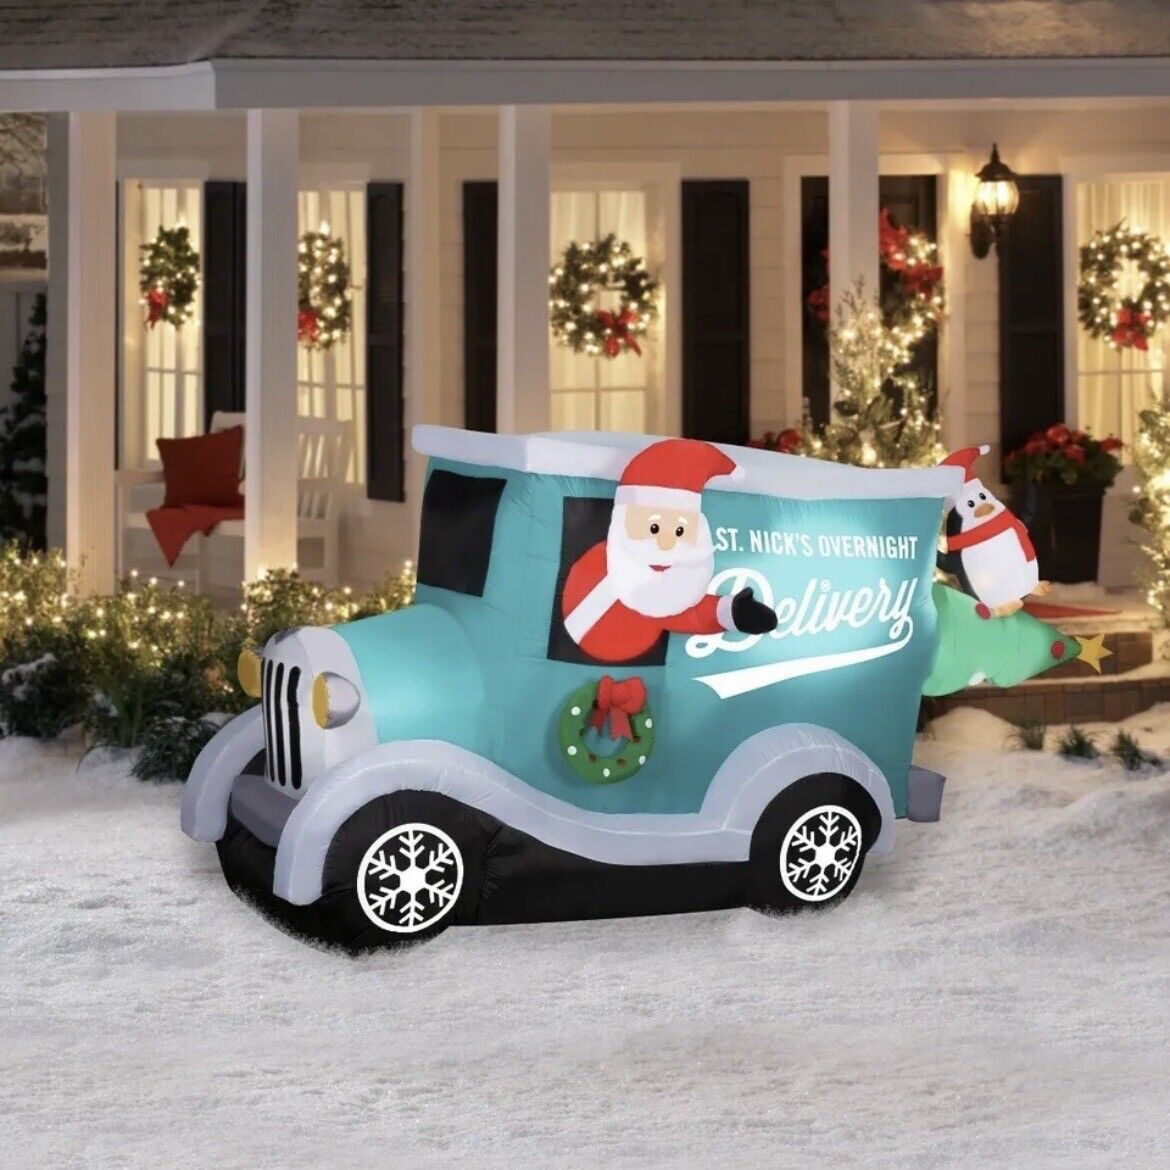 Holiday Time Christmas Inflatable 8 FT Santa's Delivery Truck Scene Yard Decor